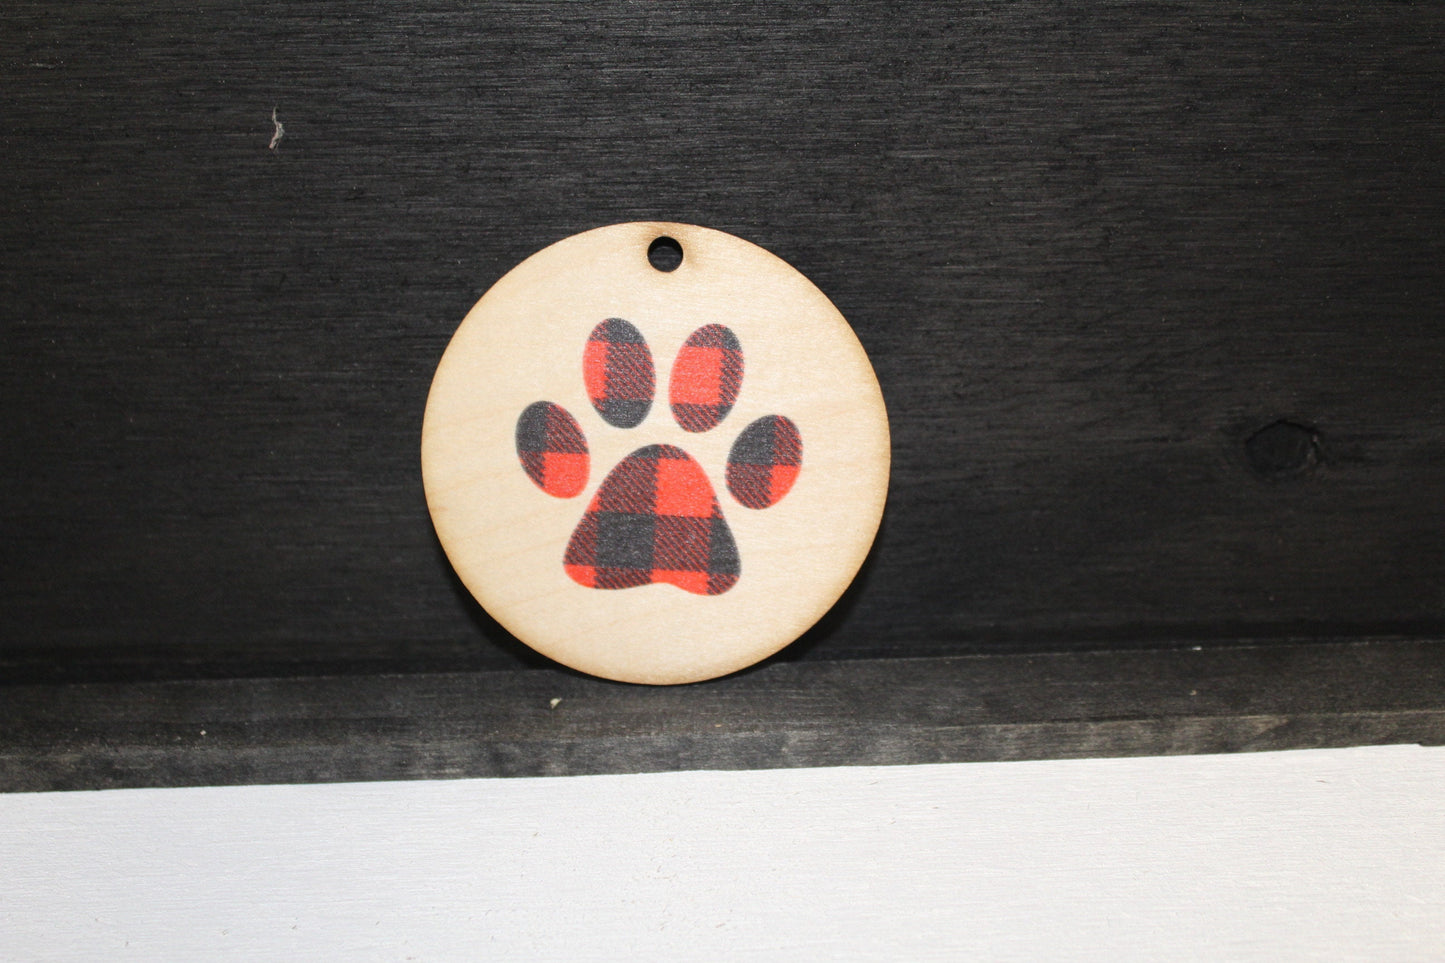 Paw Print Wood Slice UV Printed Wooden Plaid Christmas Ornament 3 Inch Round Circle Tree In Memory Of Remembrance Pup Red Rustic Primitive